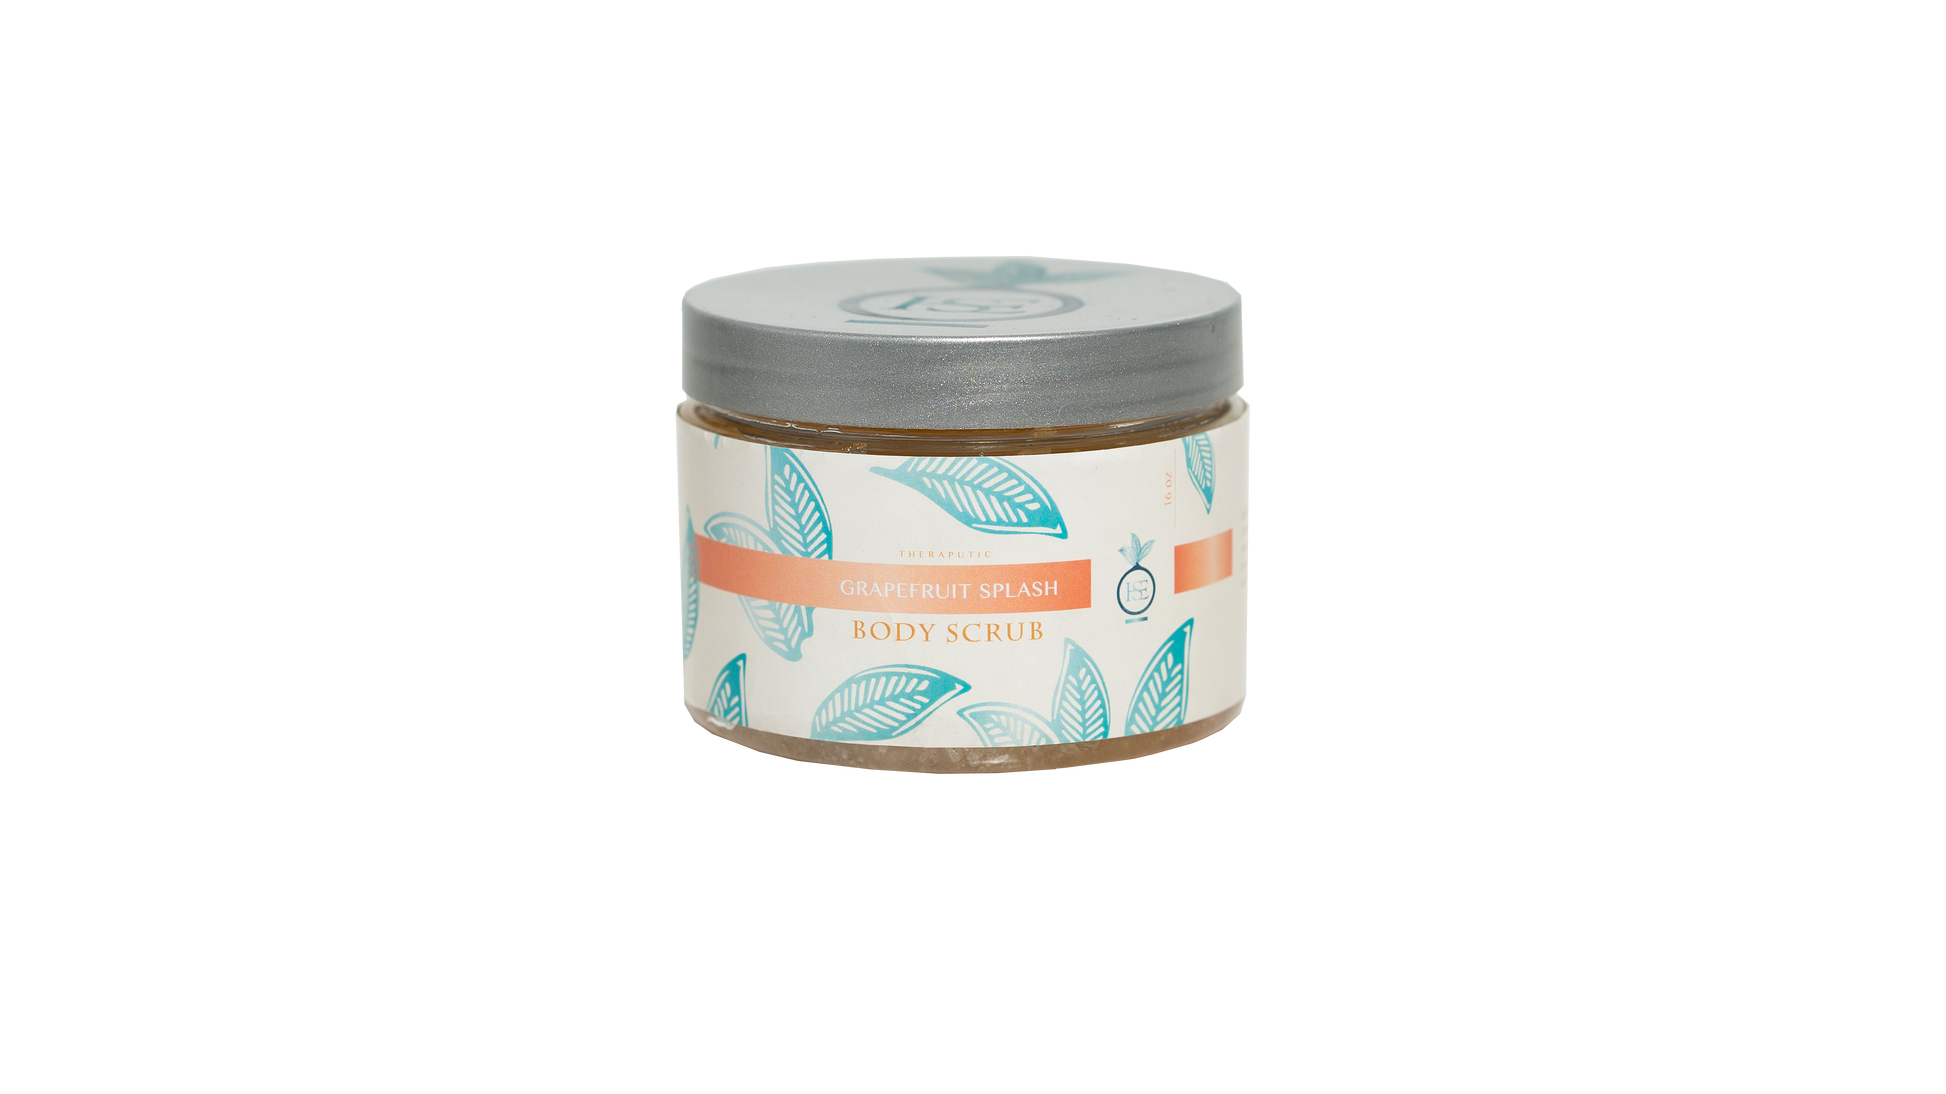 A closed 16 oz. jar of Grapefruit Splash body scrub is presented against a transparent background, emphasizing the product's vibrant and refreshing packaging.